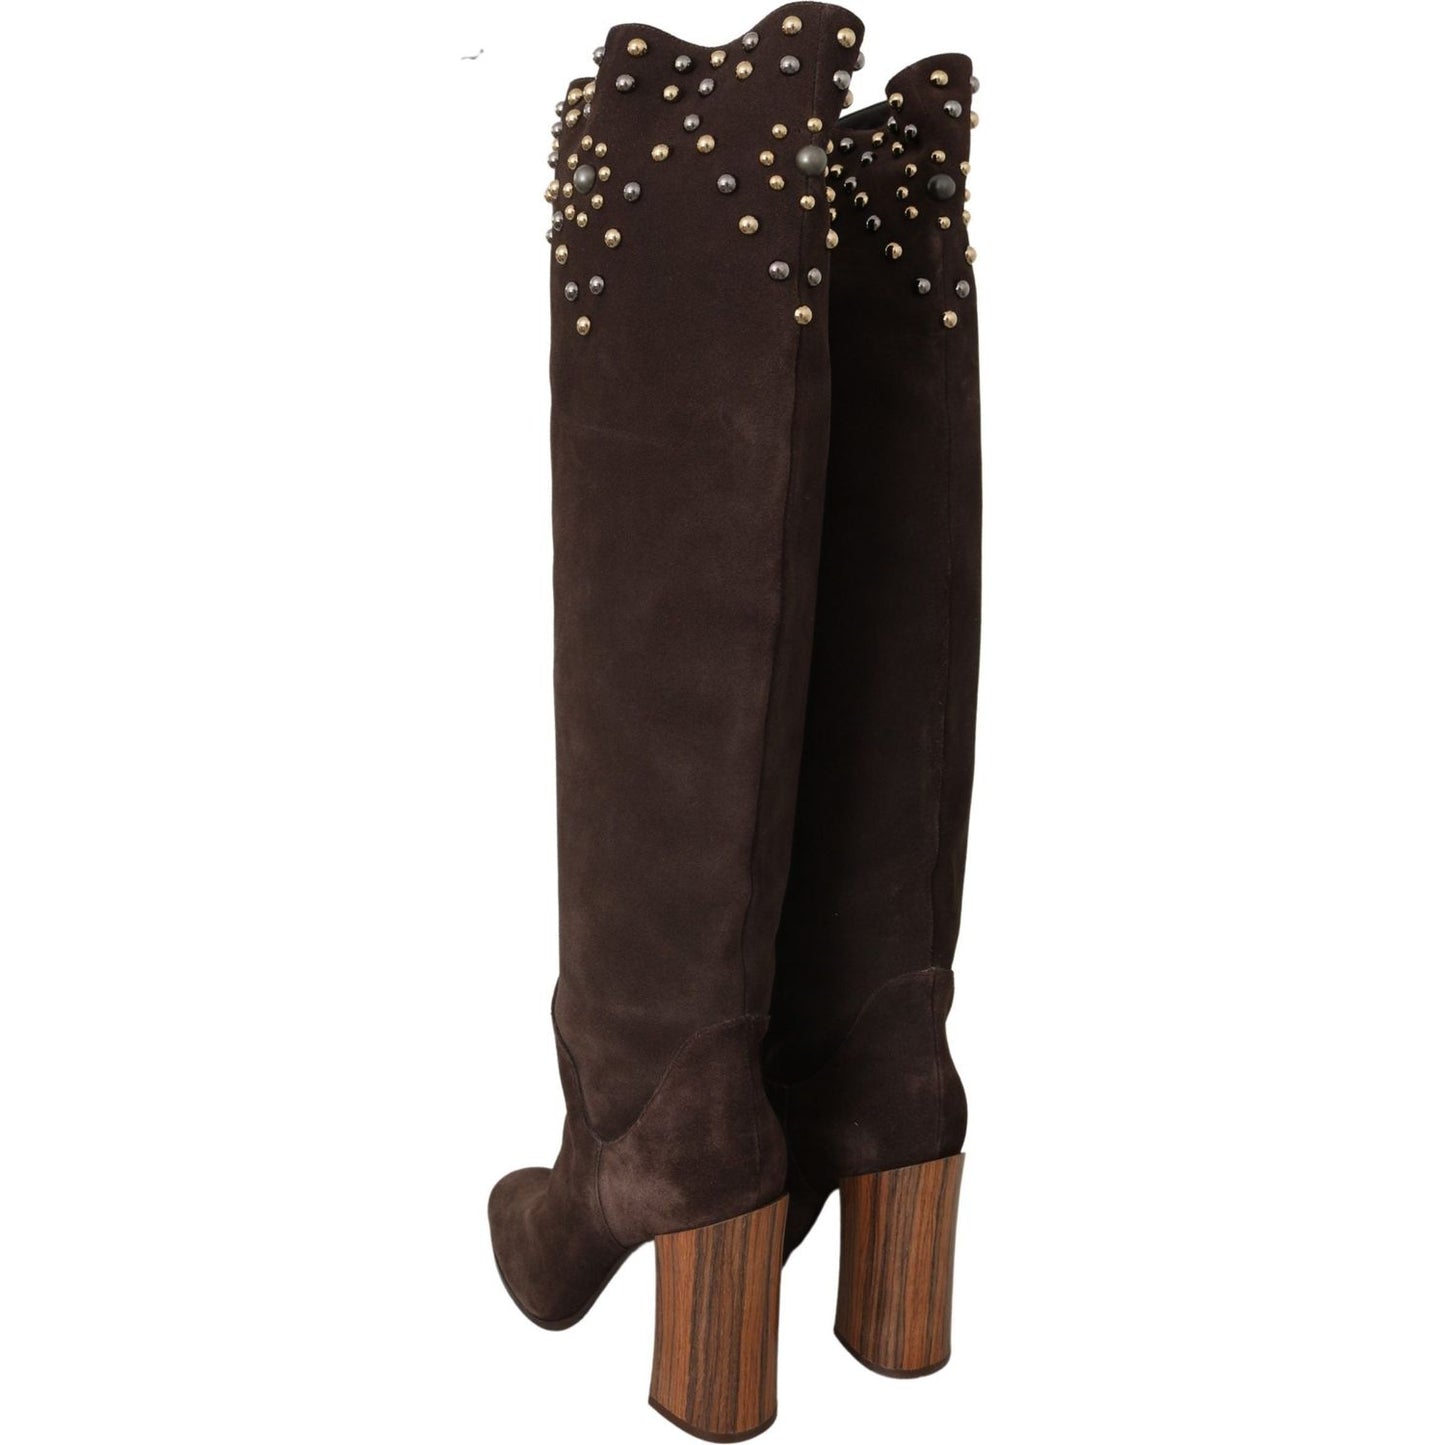 Dolce & Gabbana Studded Suede Knee High Boots in Brown brown-suede-studded-knee-high-shoes-boots